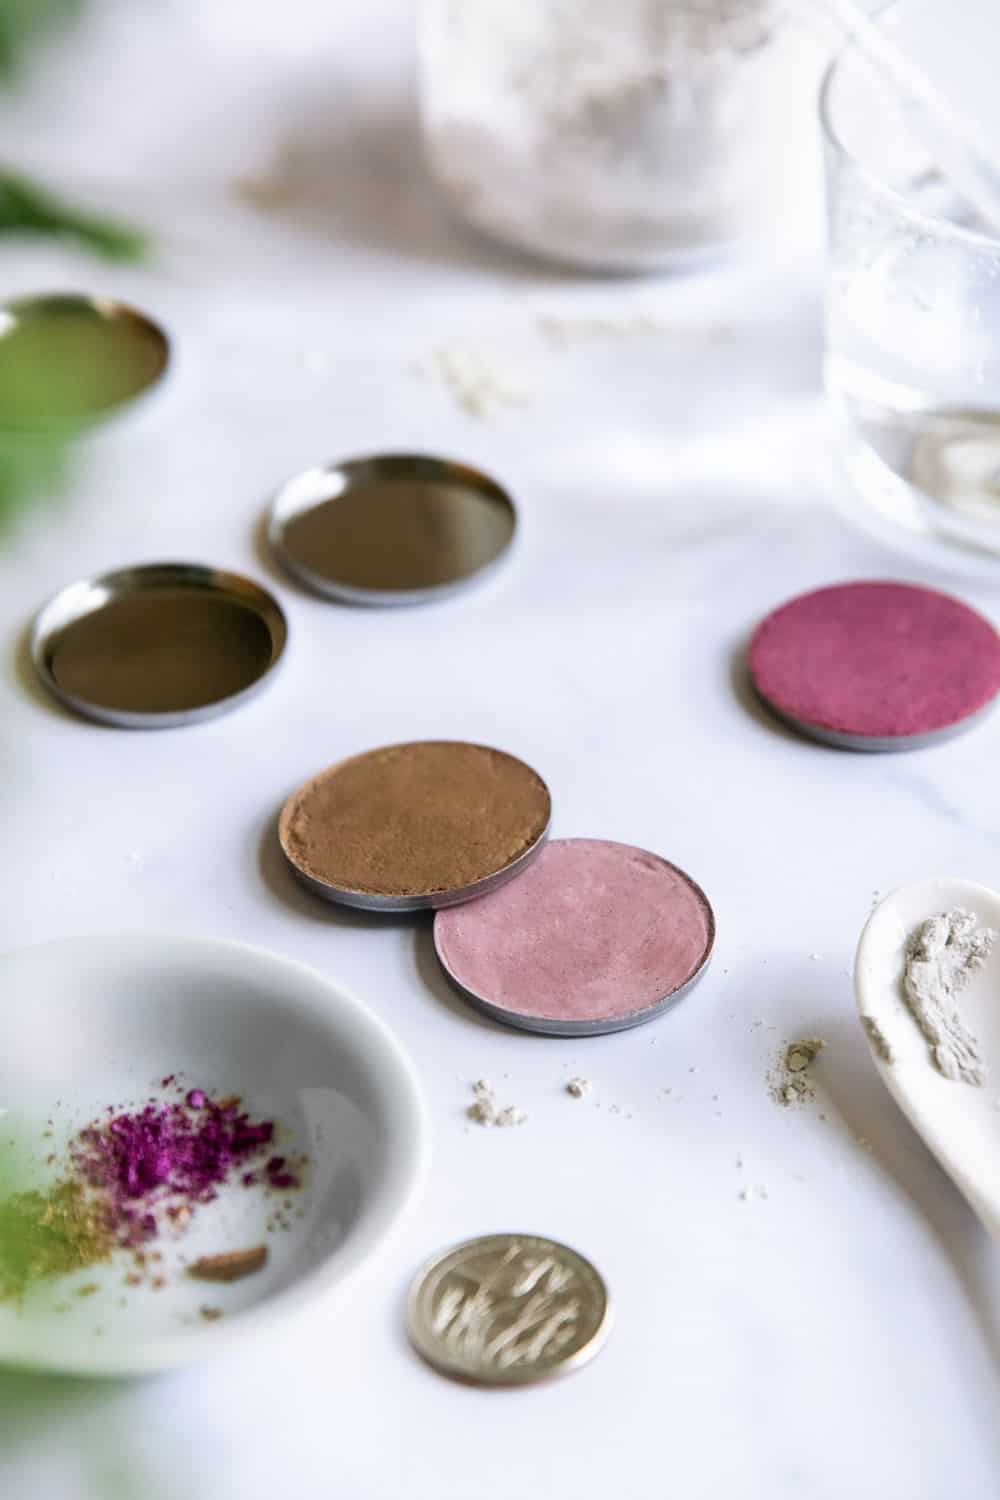 How to make pressed eye shadow